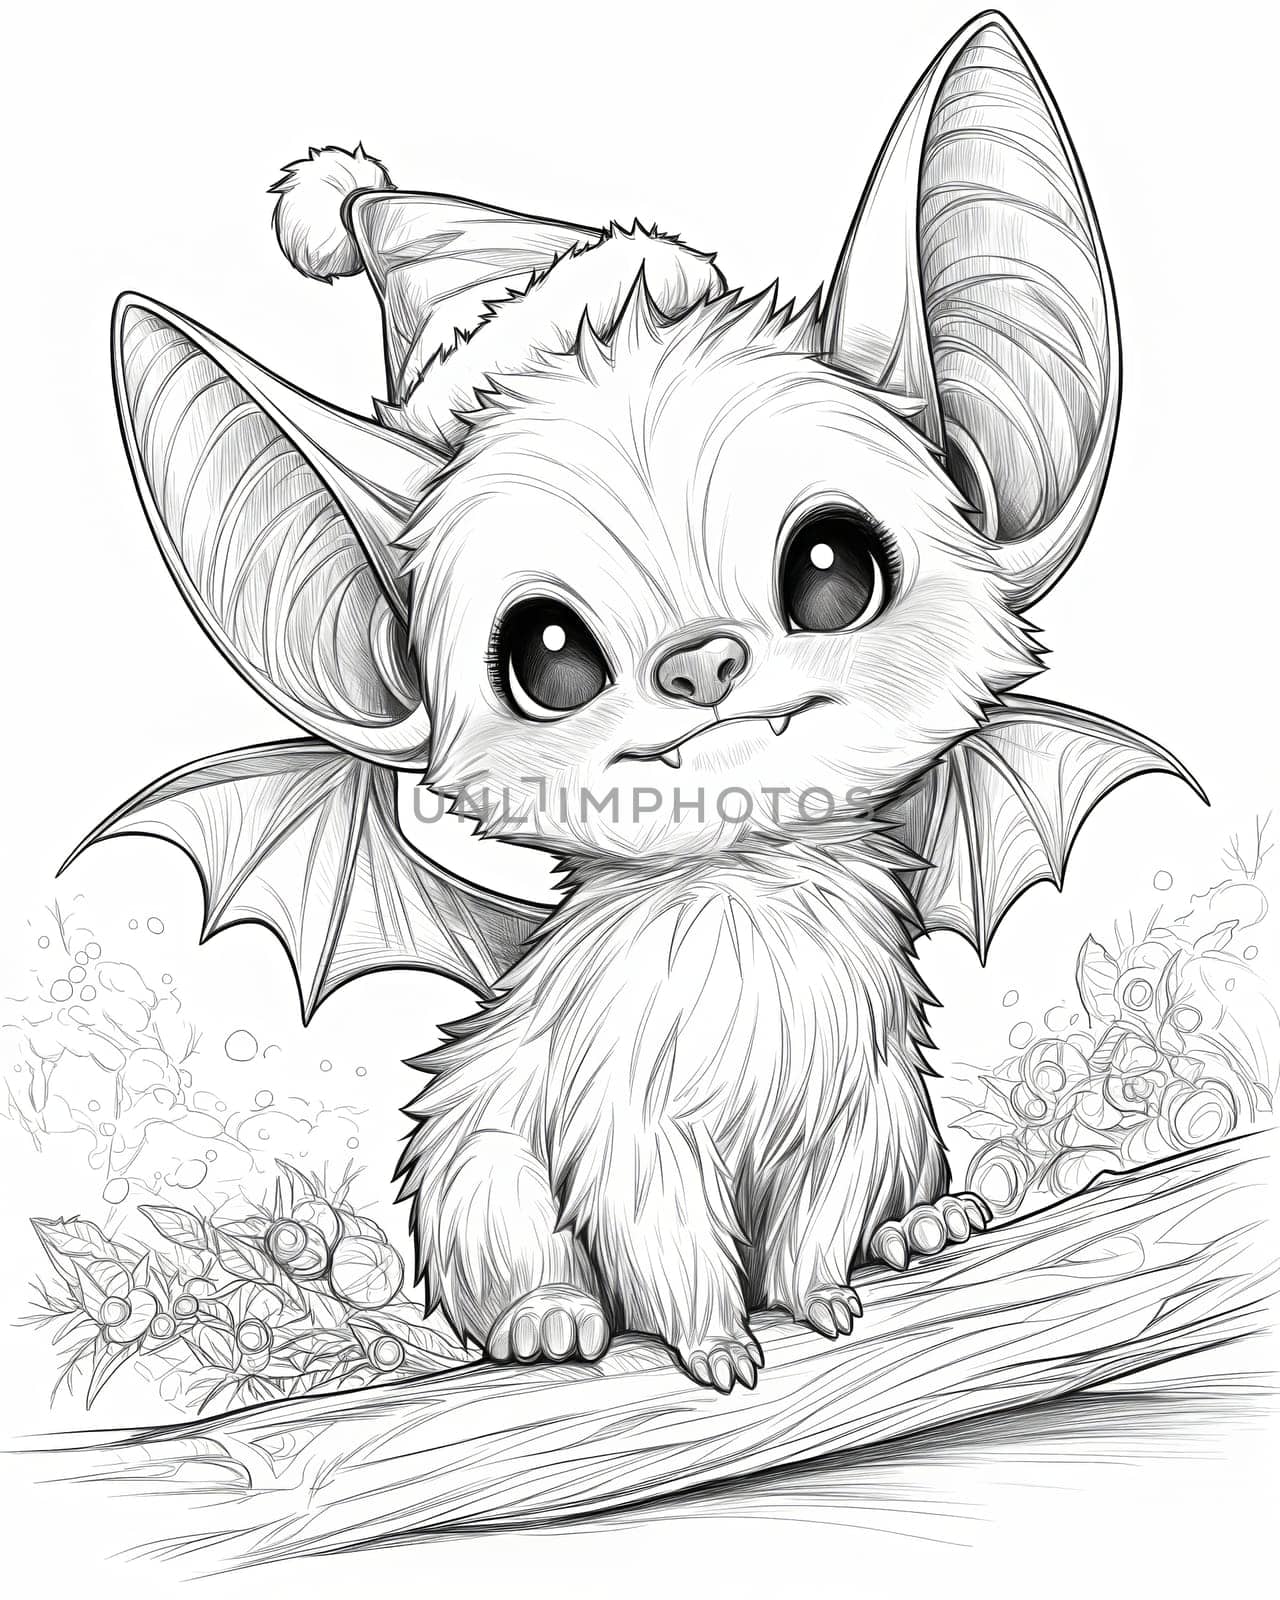 Coloring book for children, coloring animal, bat. Selective soft focus.